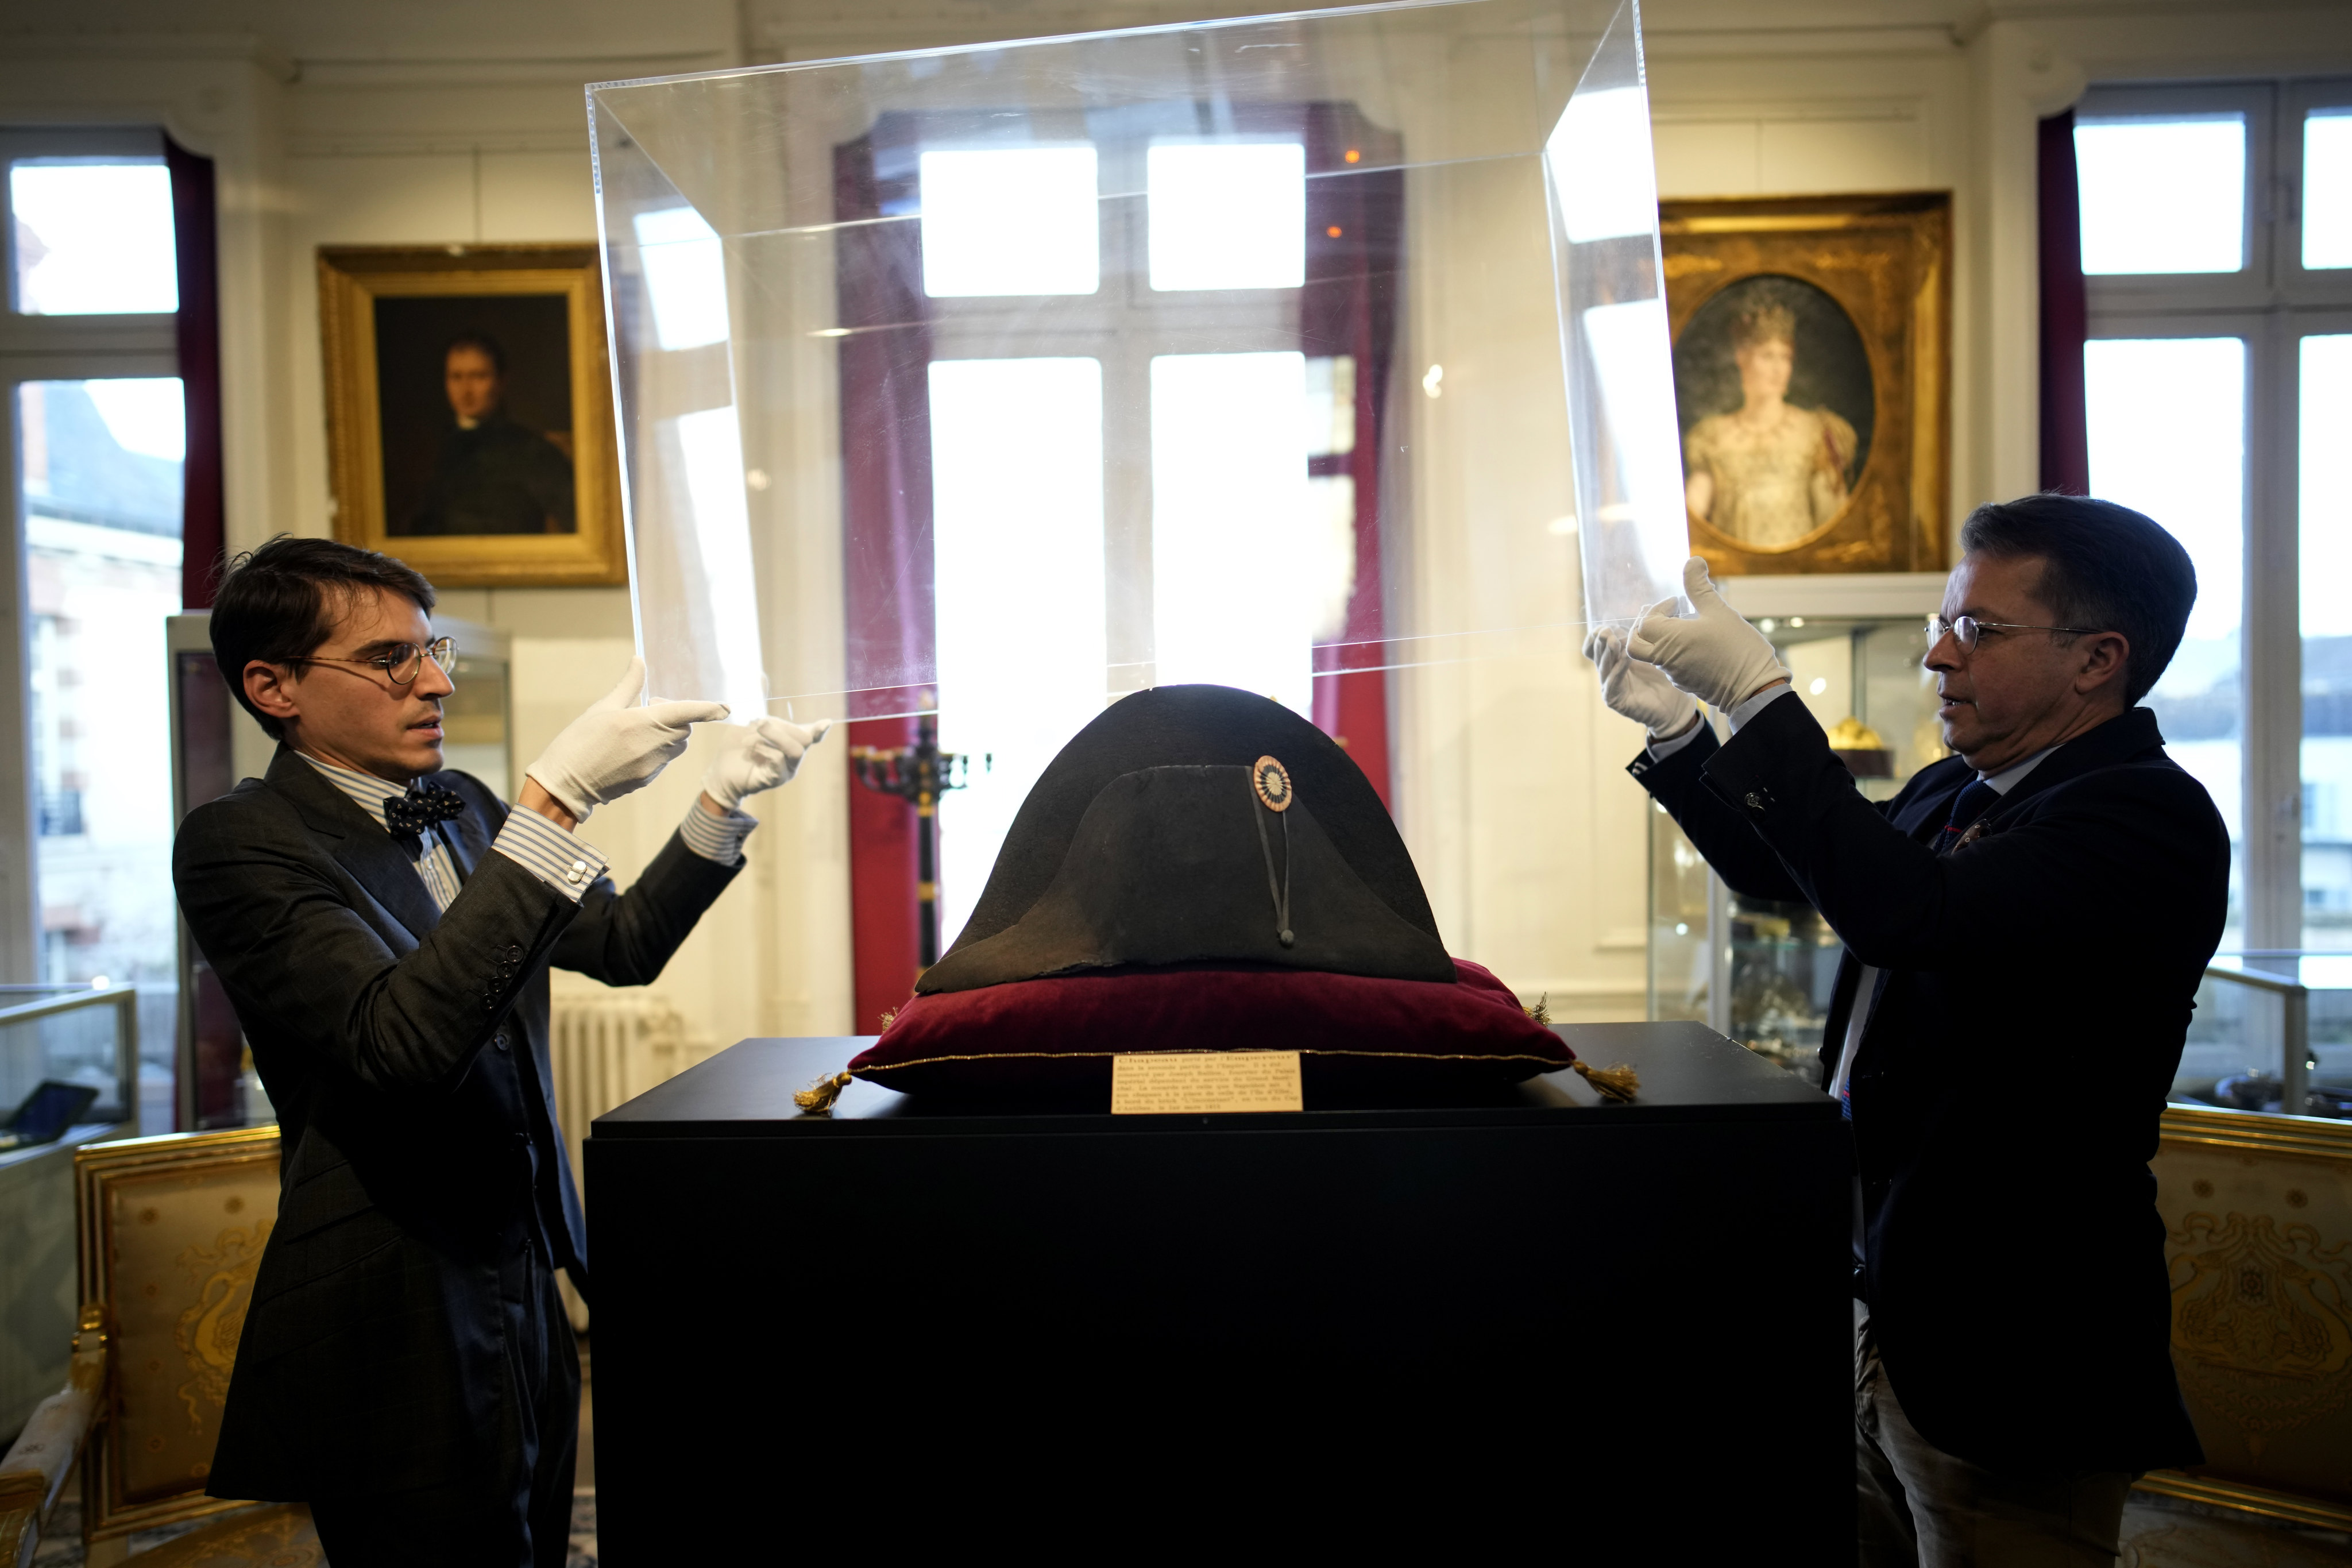 Staff at Osenat’s auction house in Fontainebleau, south of Paris, remove the protective case of one of the signature broad, black hats that Napoleon Bonaparte wore when he ruled 19th-century France and waged war in Europe. Photo: AP